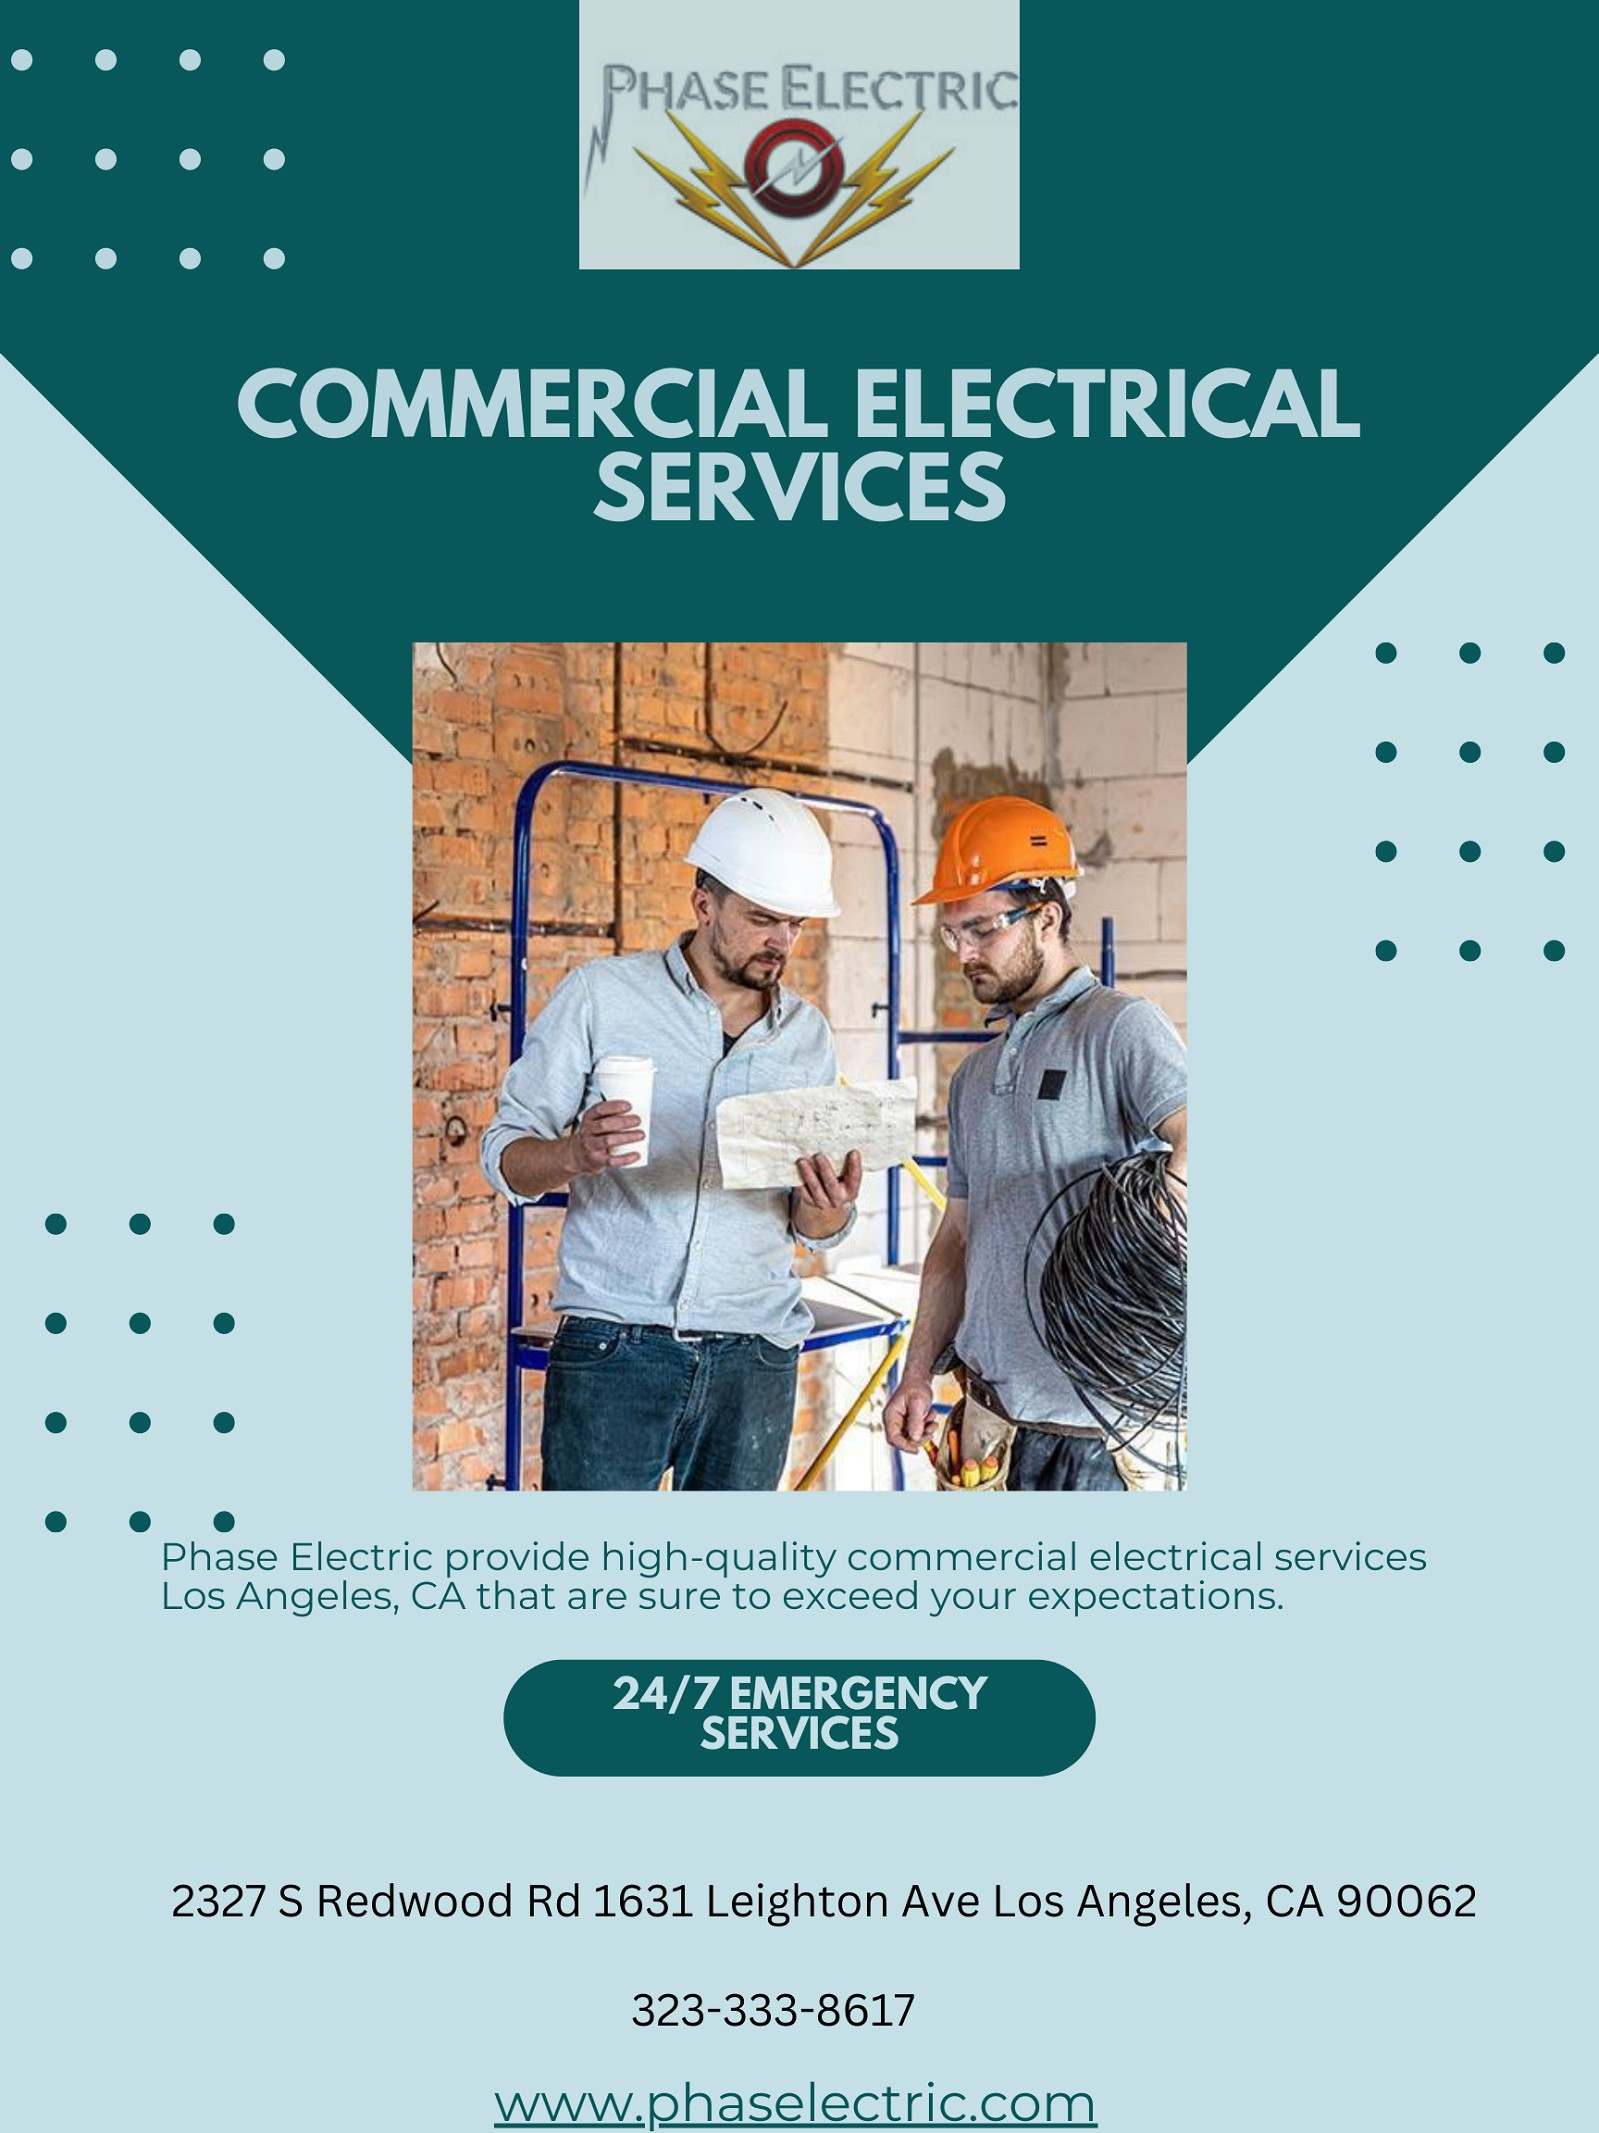 Commercial Electrical Services For Industrial Needs